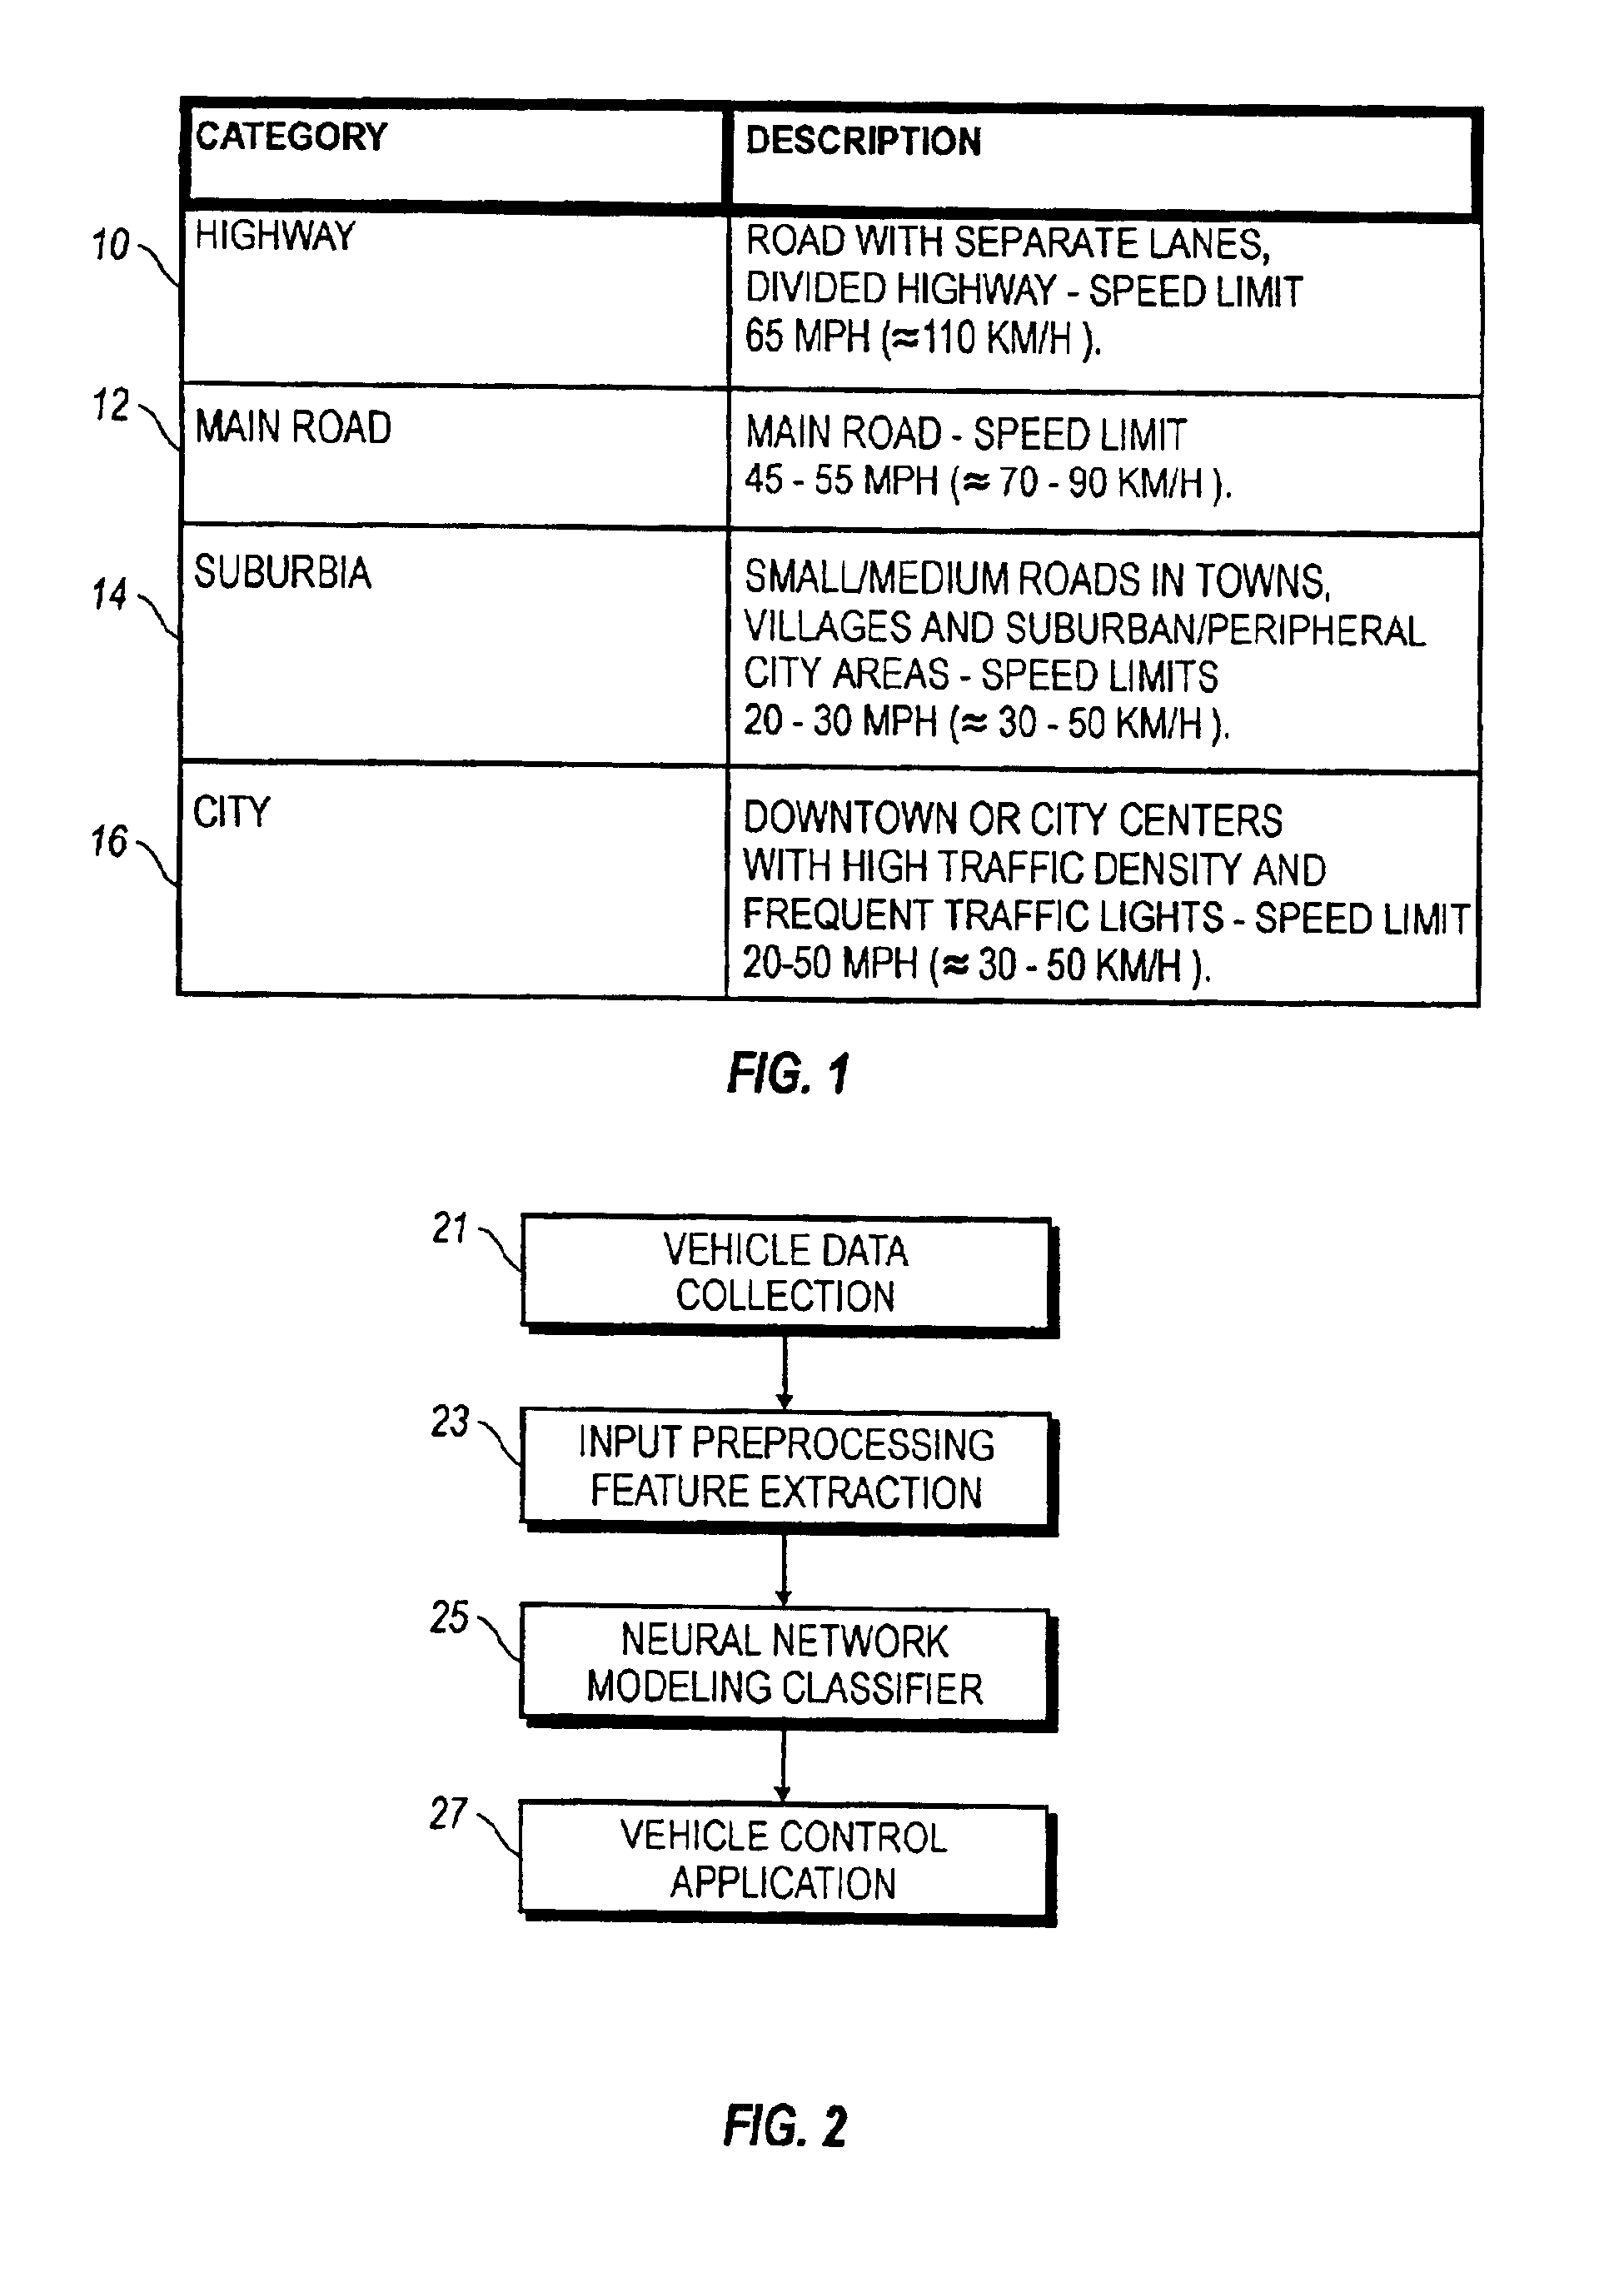 System and method for real-time recognition of driving patterns